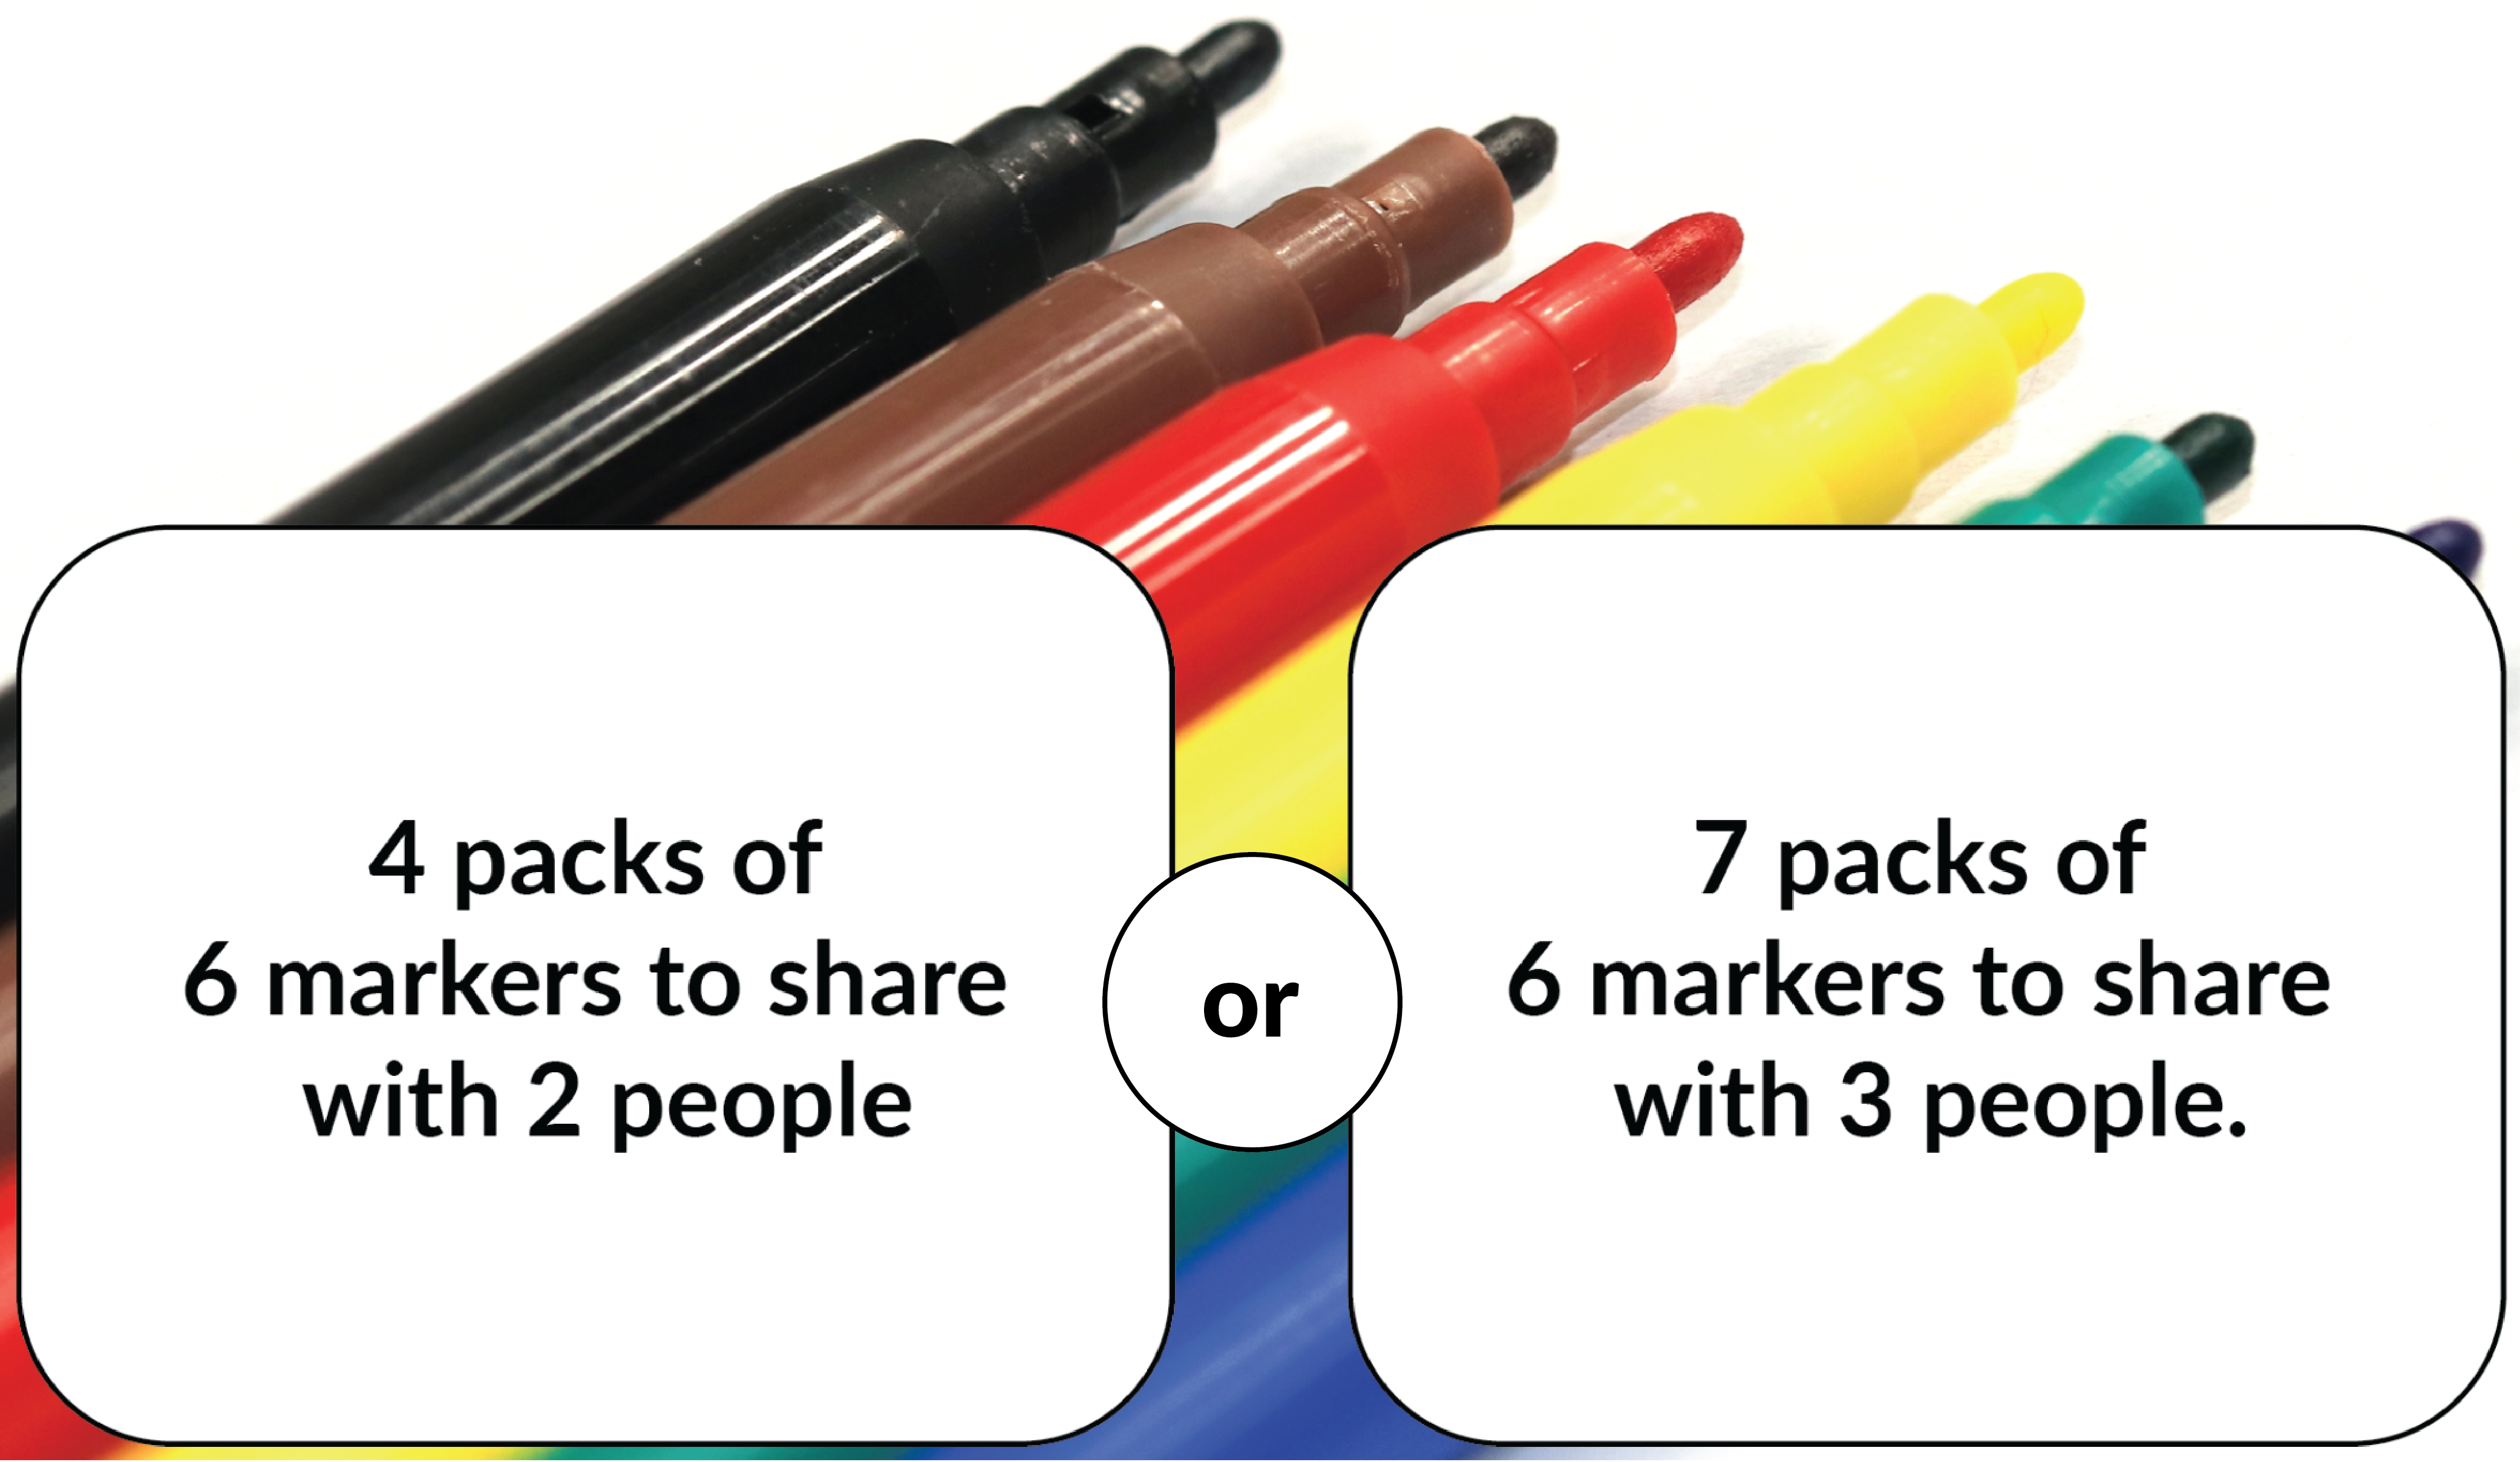 4 packs of 6 markers to share with 2 people? Or 7 packs of 6 markers to share with 3 people?